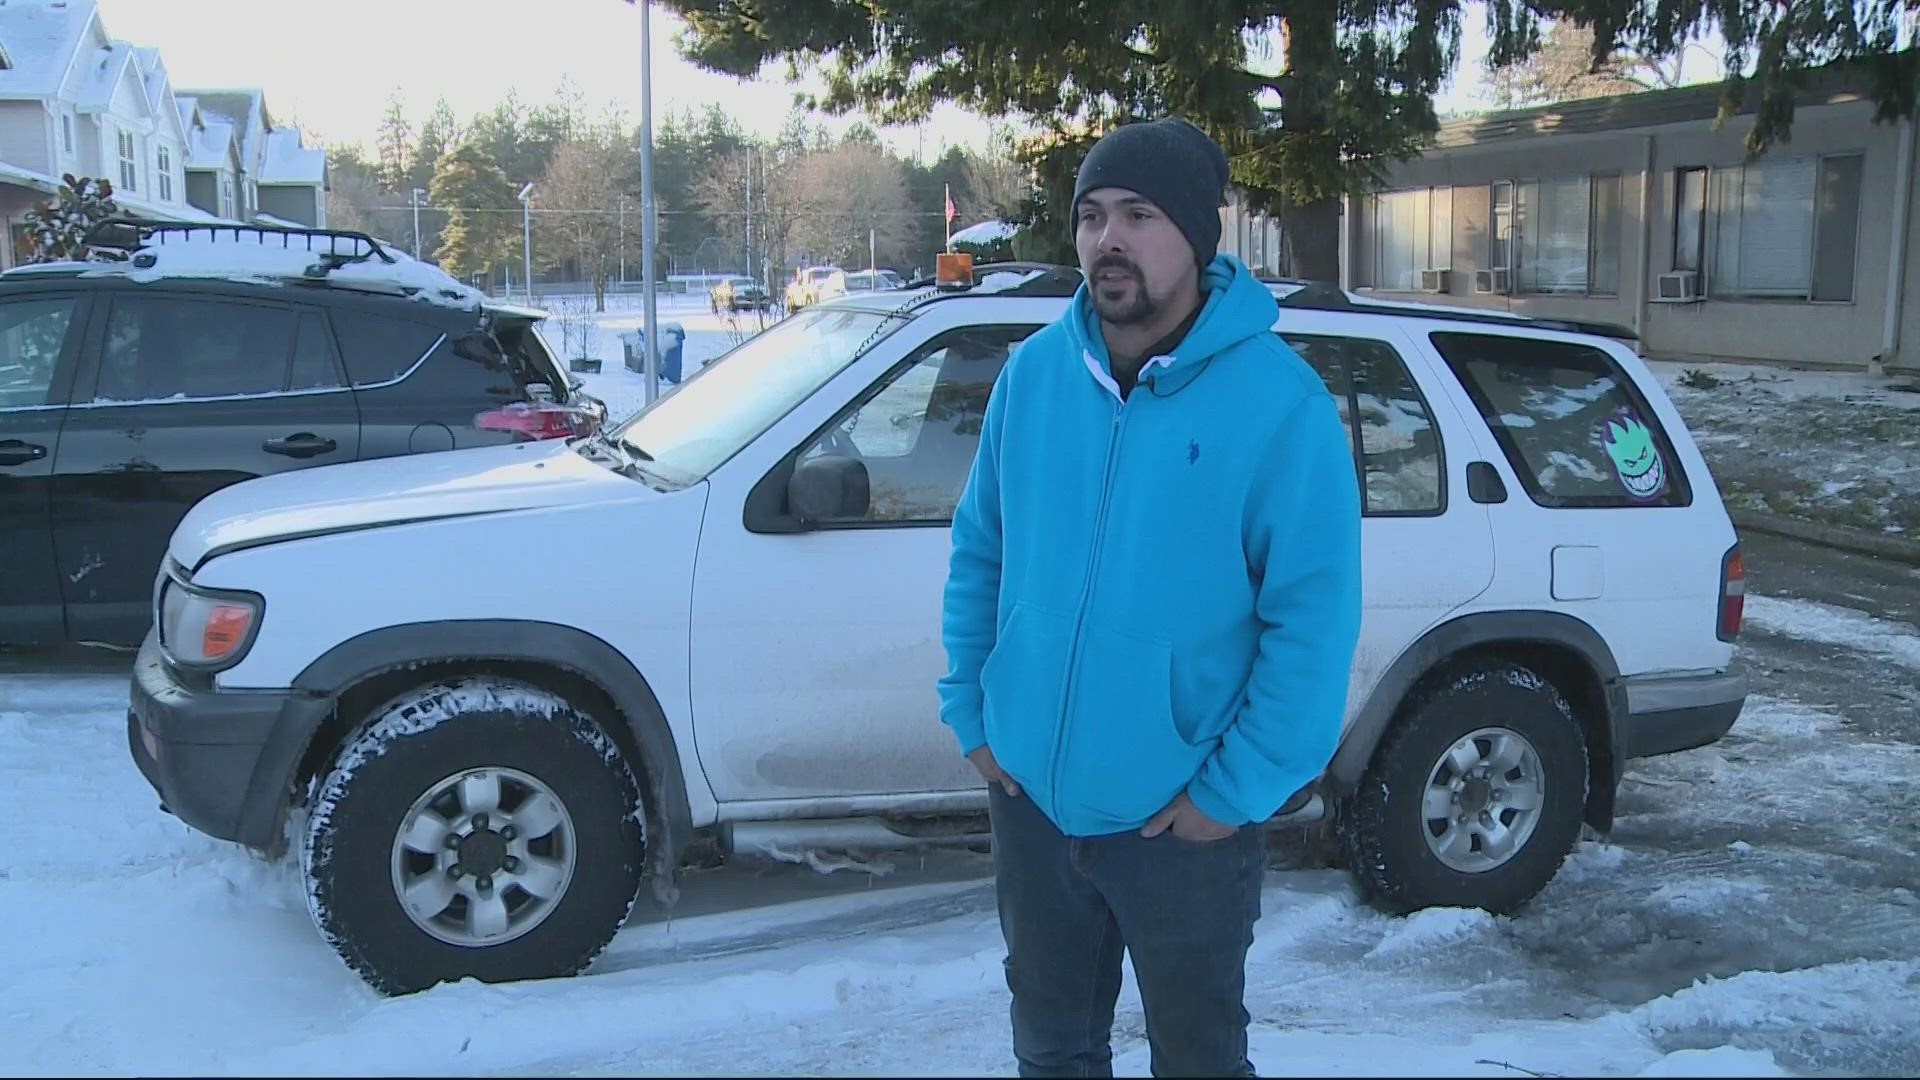 After so many were stranded on the snowy roads, a good Samaritan's helped those in need for free.